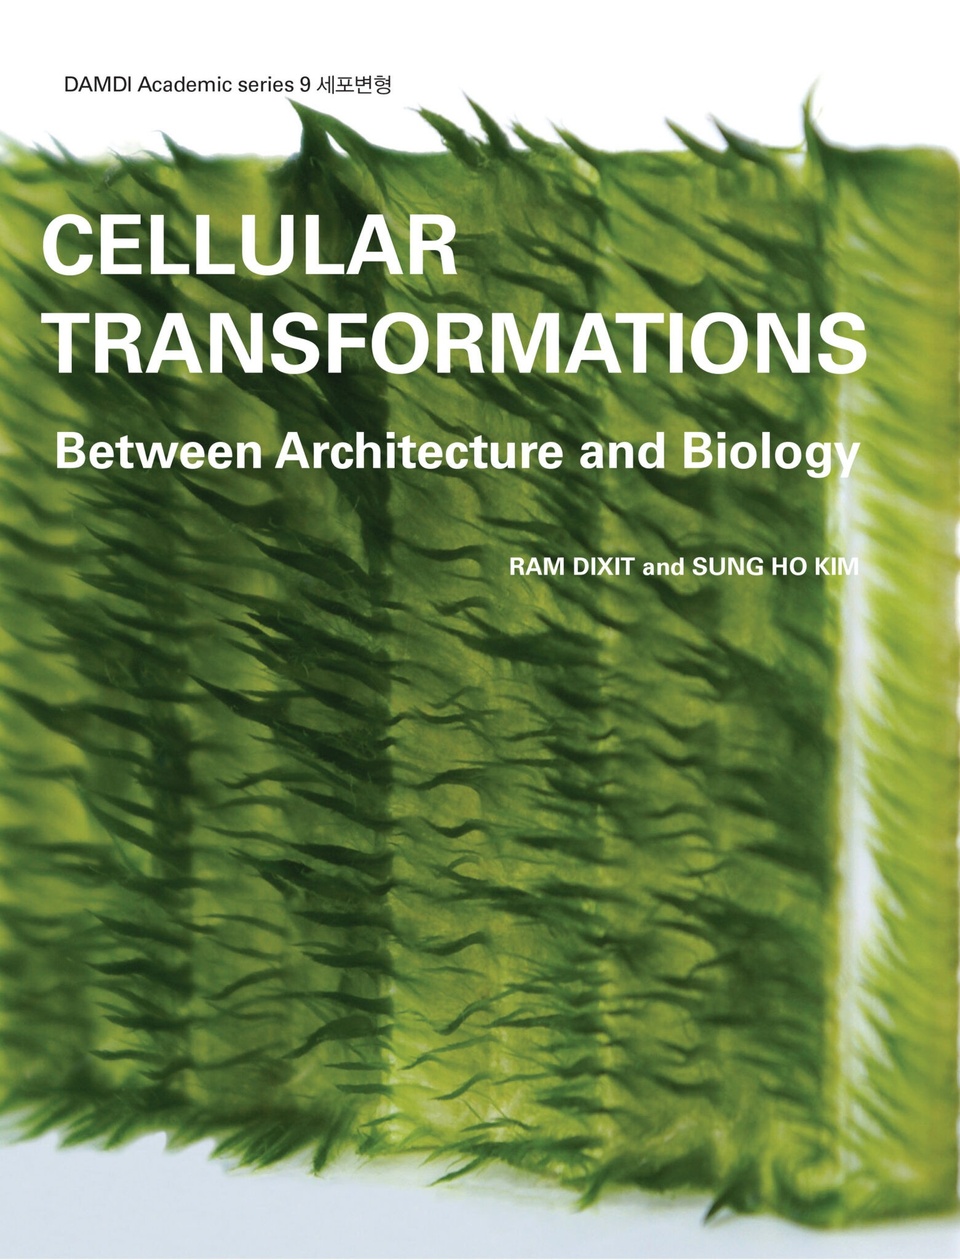 Book cover of Cellular Transformations, featuring a green, grasslike square with white type.